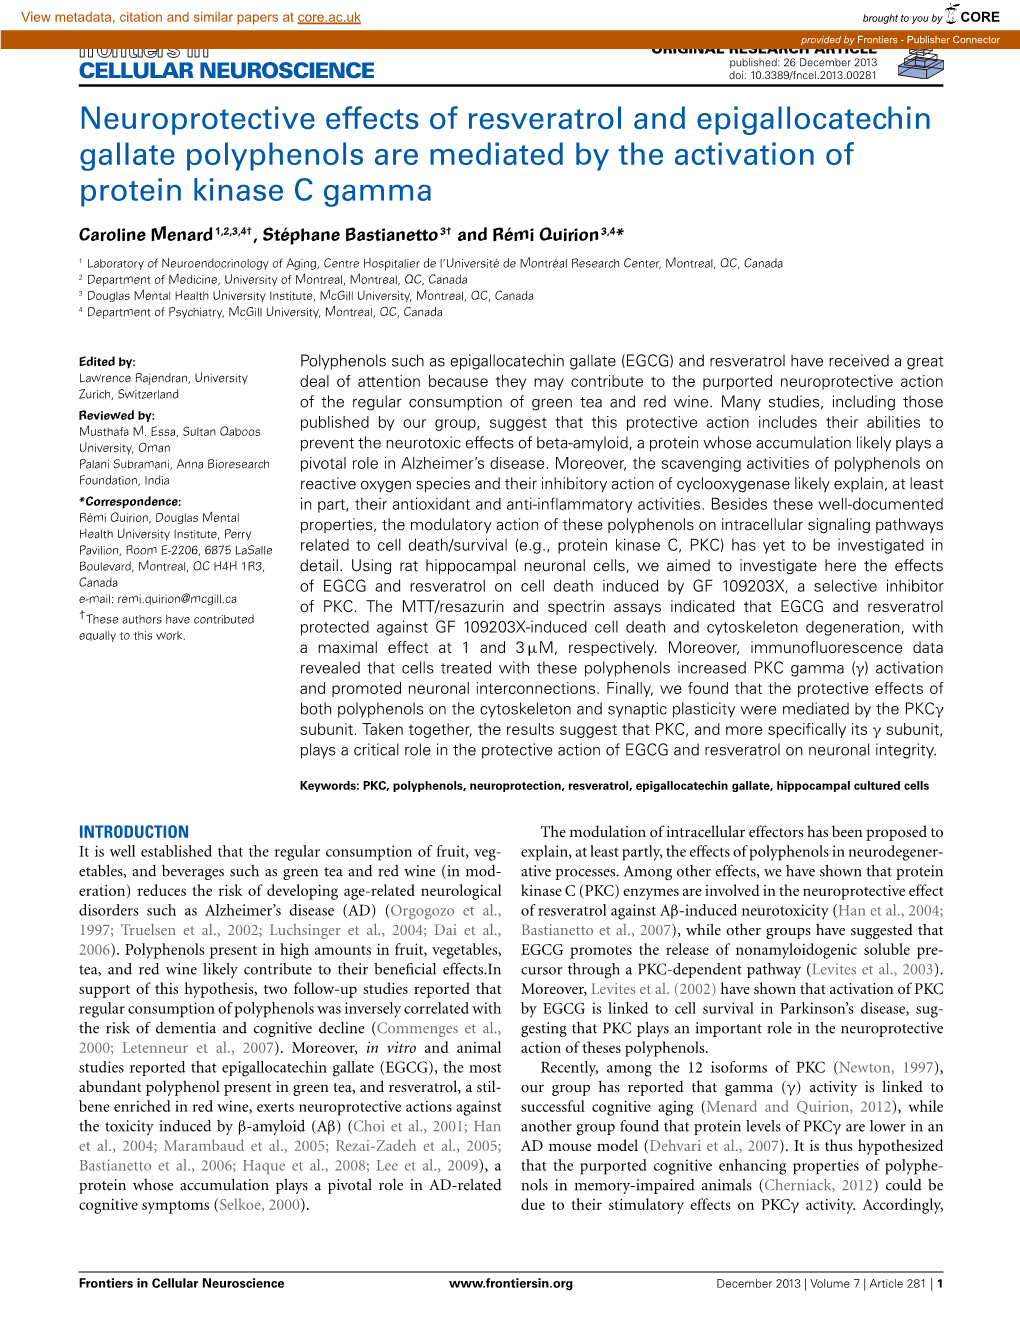 Neuroprotective Effects of Resveratrol and Epigallocatechin Gallate Polyphenols Are Mediated by the Activation of Protein Kinase C Gamma